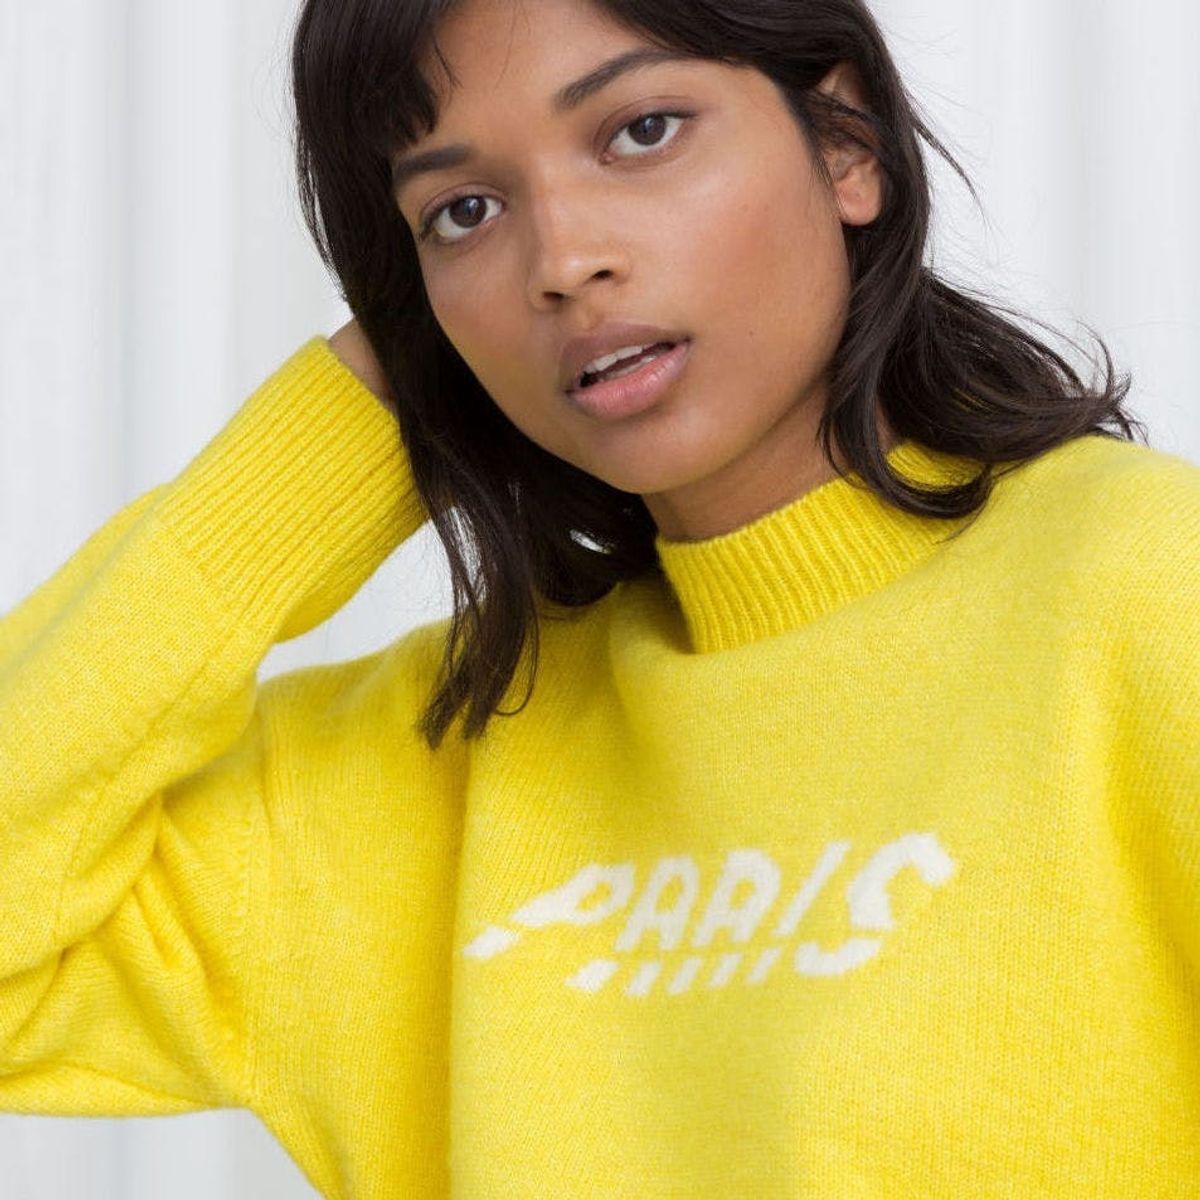 12 Bold Sweater Buys to Wear This Winter